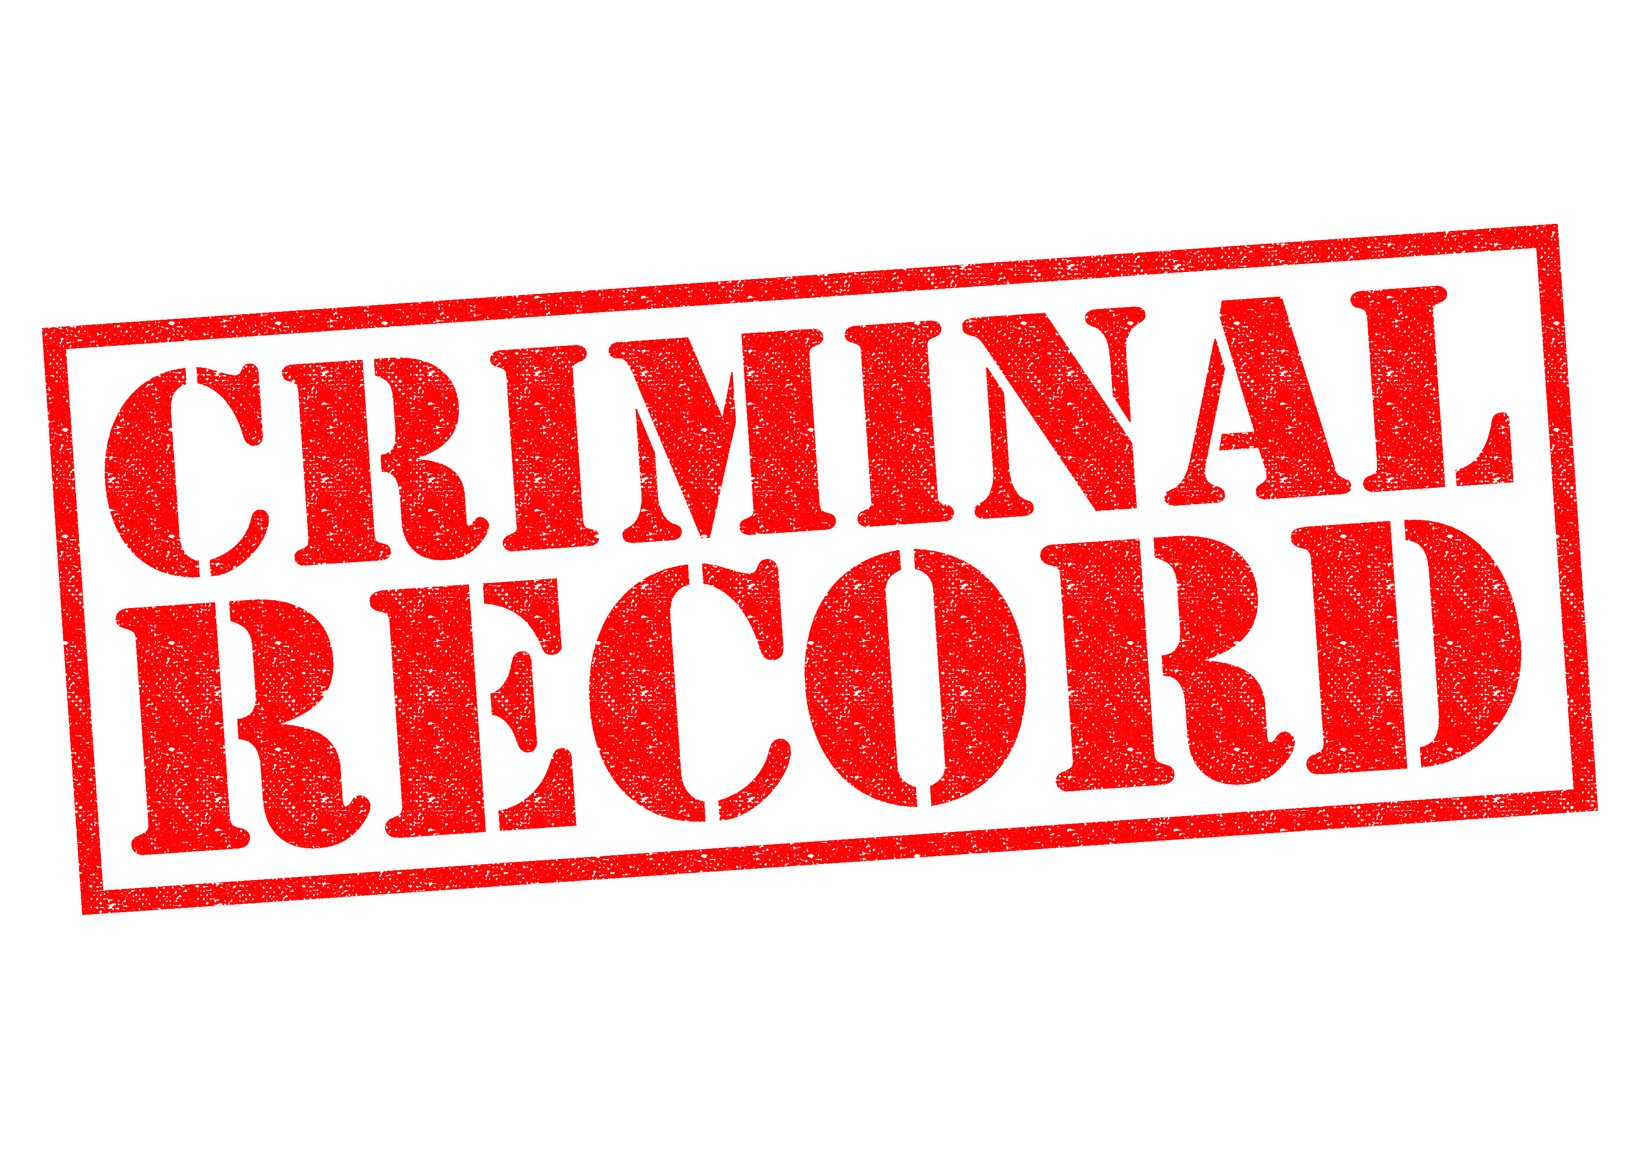 USCIS Announces: Evidence of a Criminal Record is Not Automatic Grounds for Denial of A Provisional Waiver